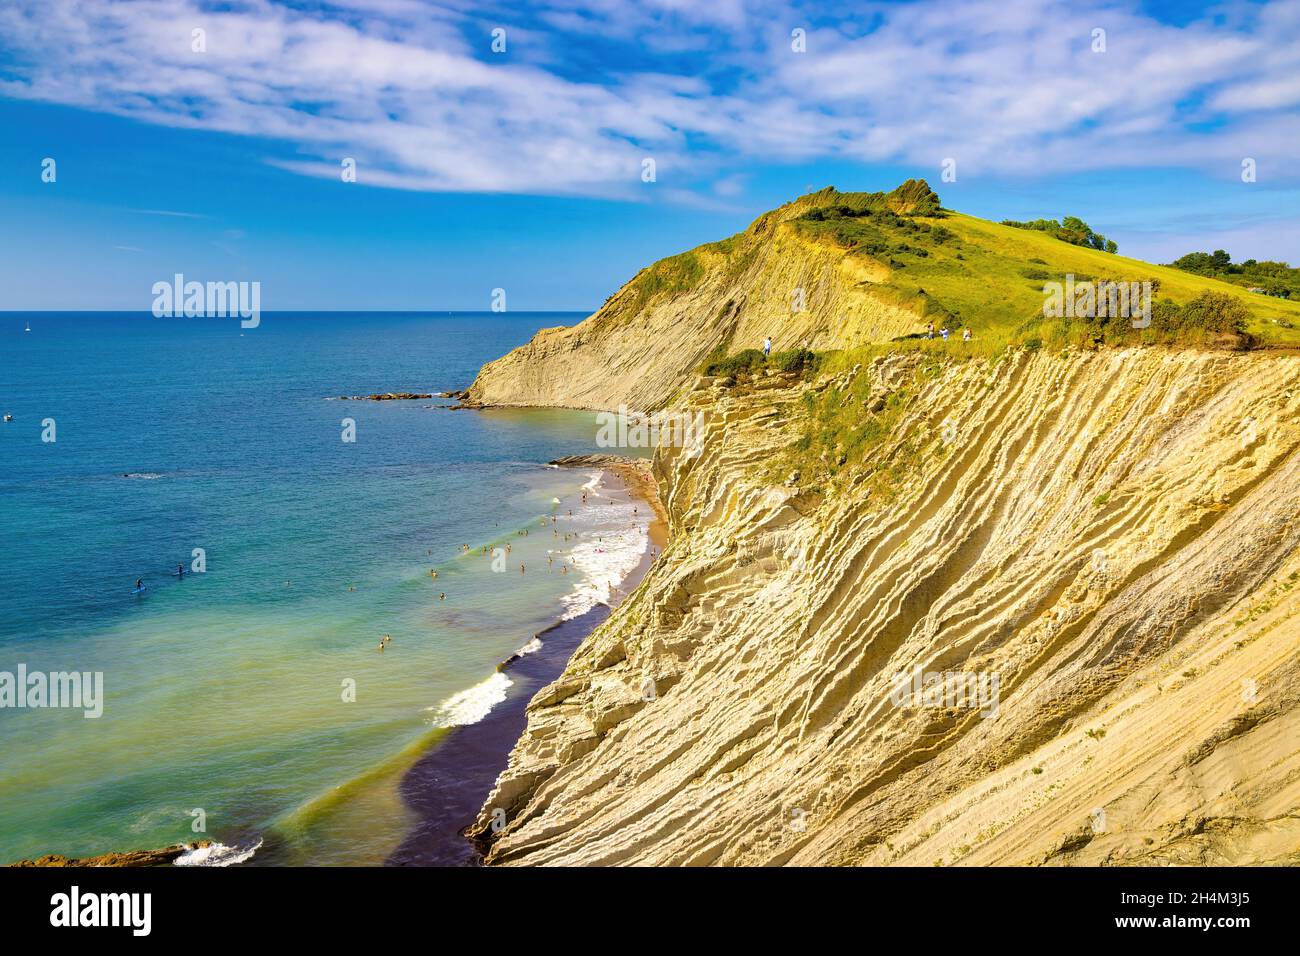 View of one of the top of the Zumaya cliff with the limestone rocks forming layers. Euskadi, Spain Stock Photo